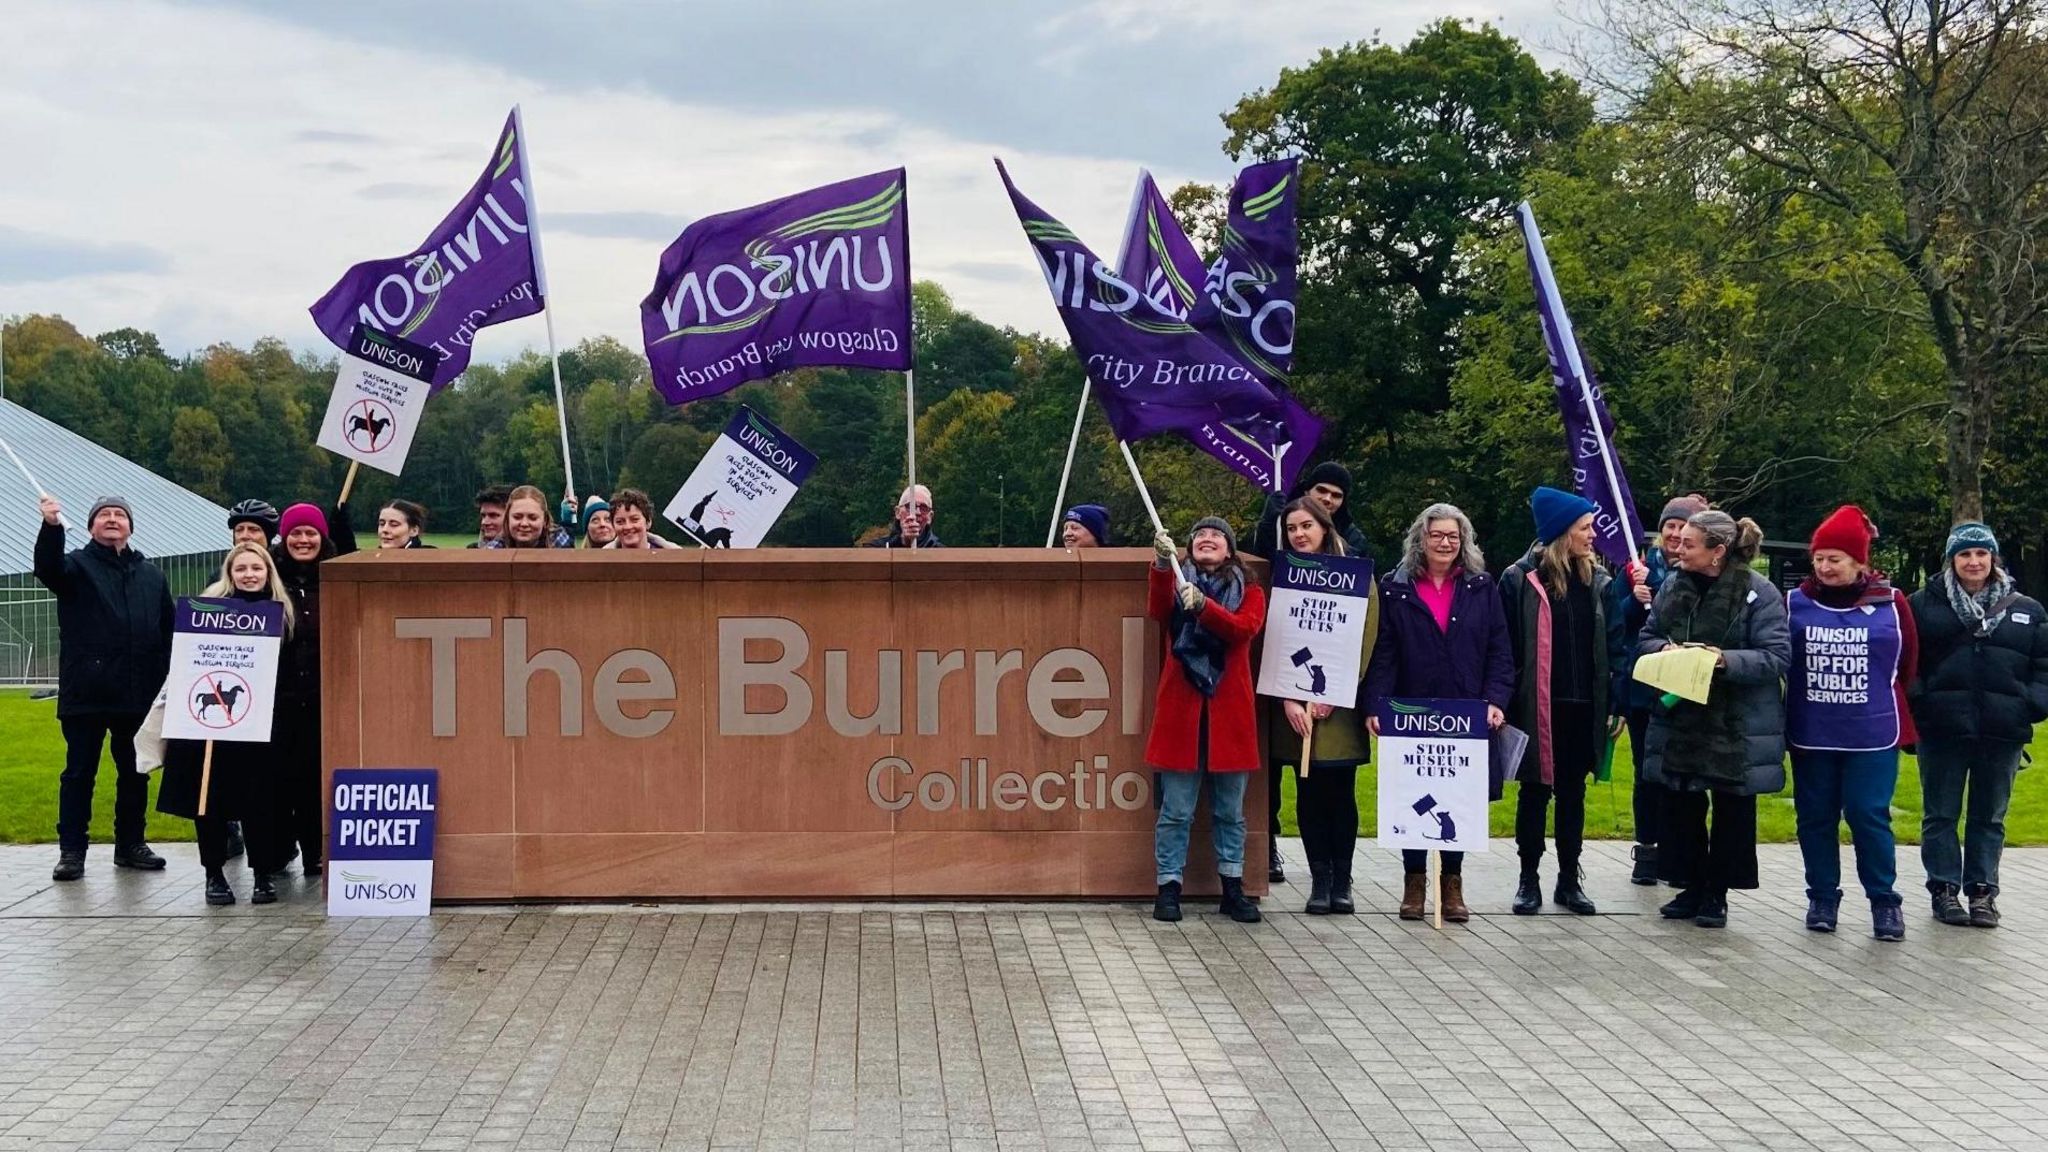 Unison members on Tuesday at The Burrell Collection in Glasgow's Pollok Park